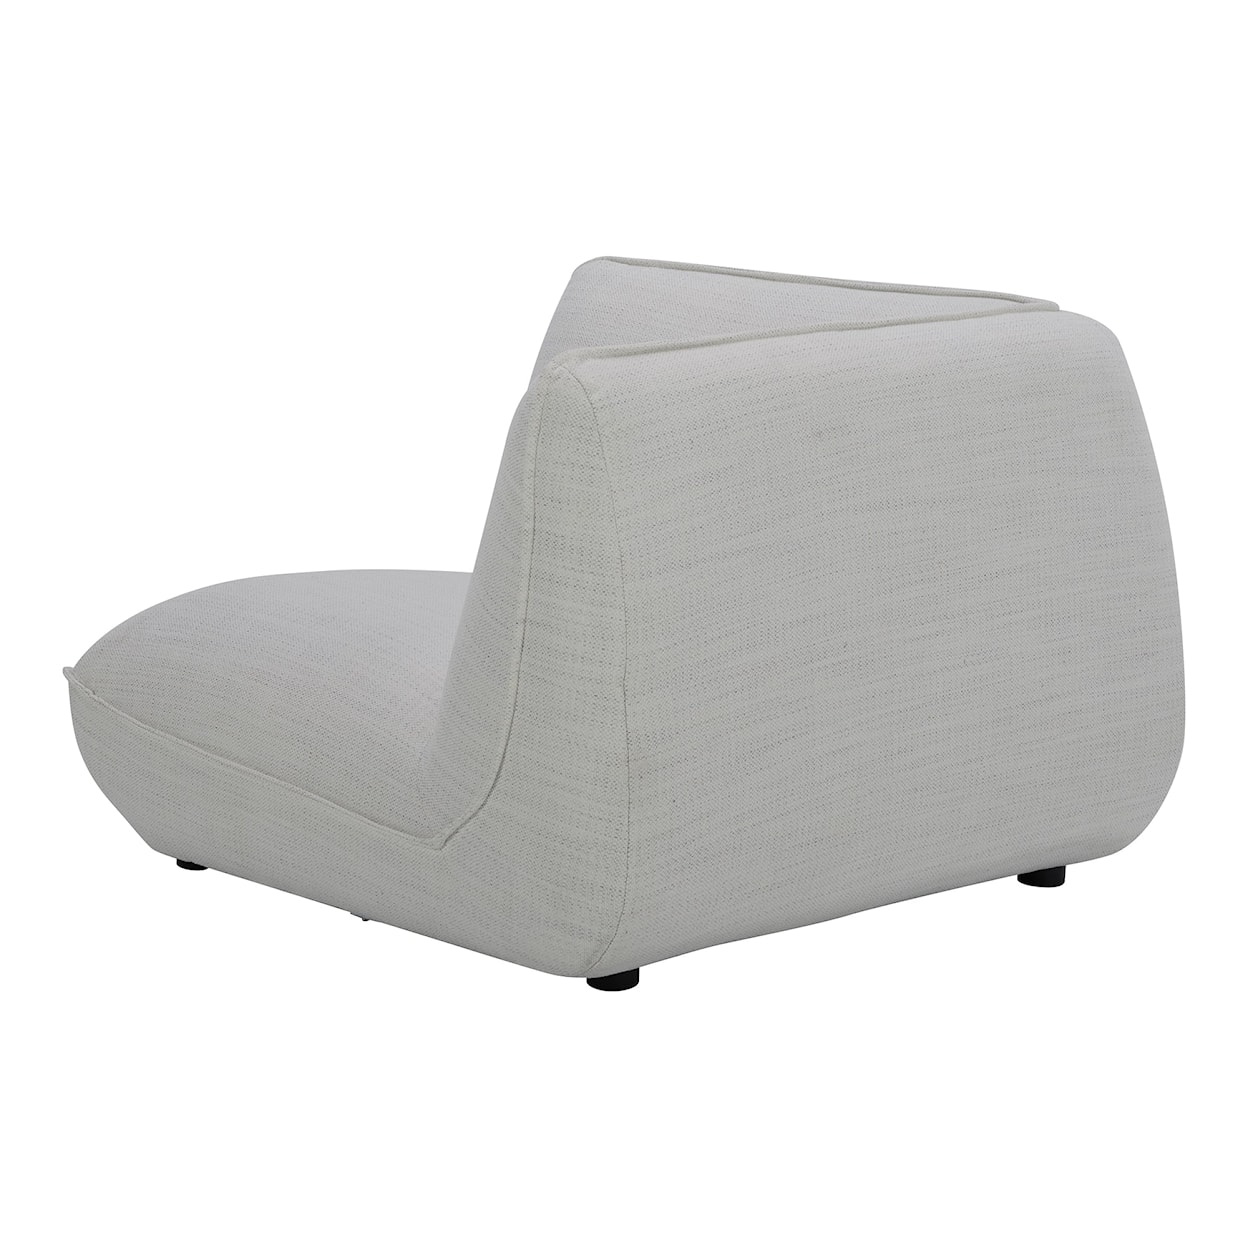 Moe's Home Collection Zeppelin Stone White Corner Chair